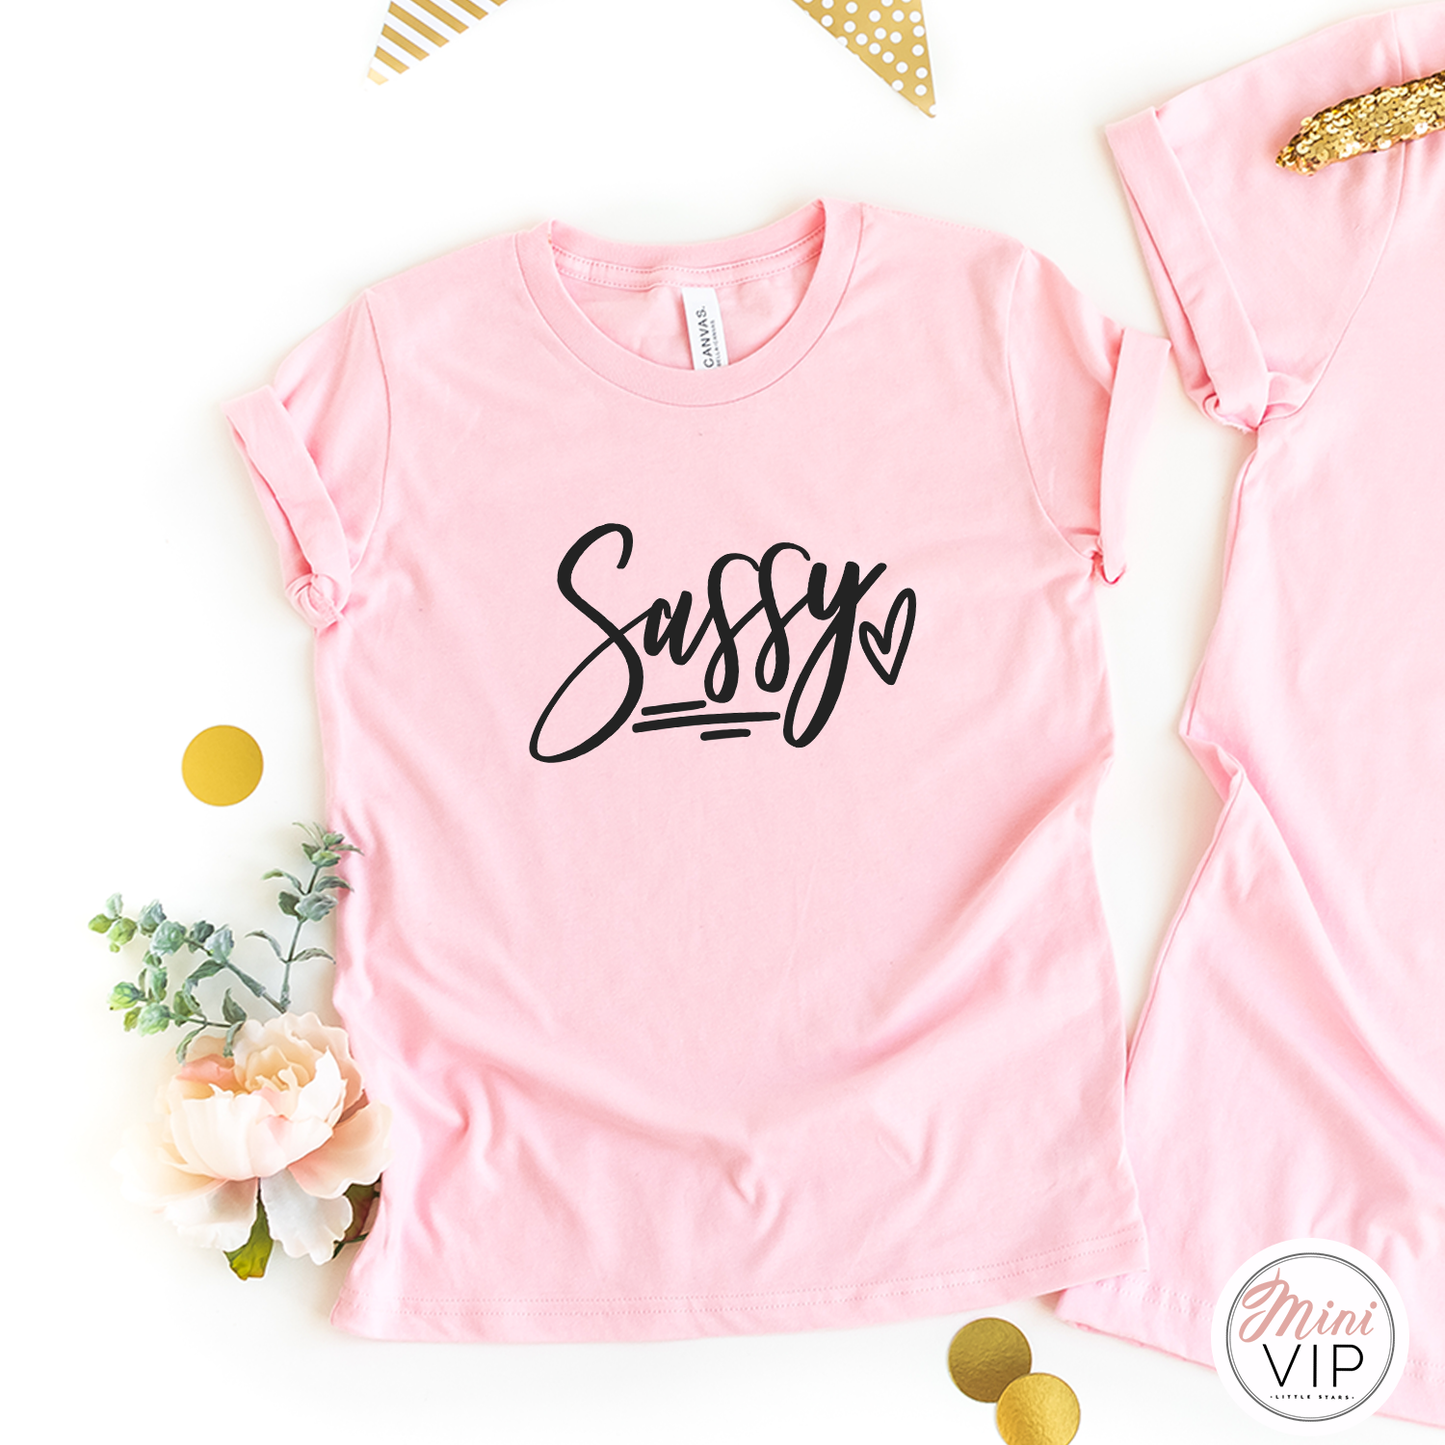 Classy with a side of Sassy - adorable twinning set*